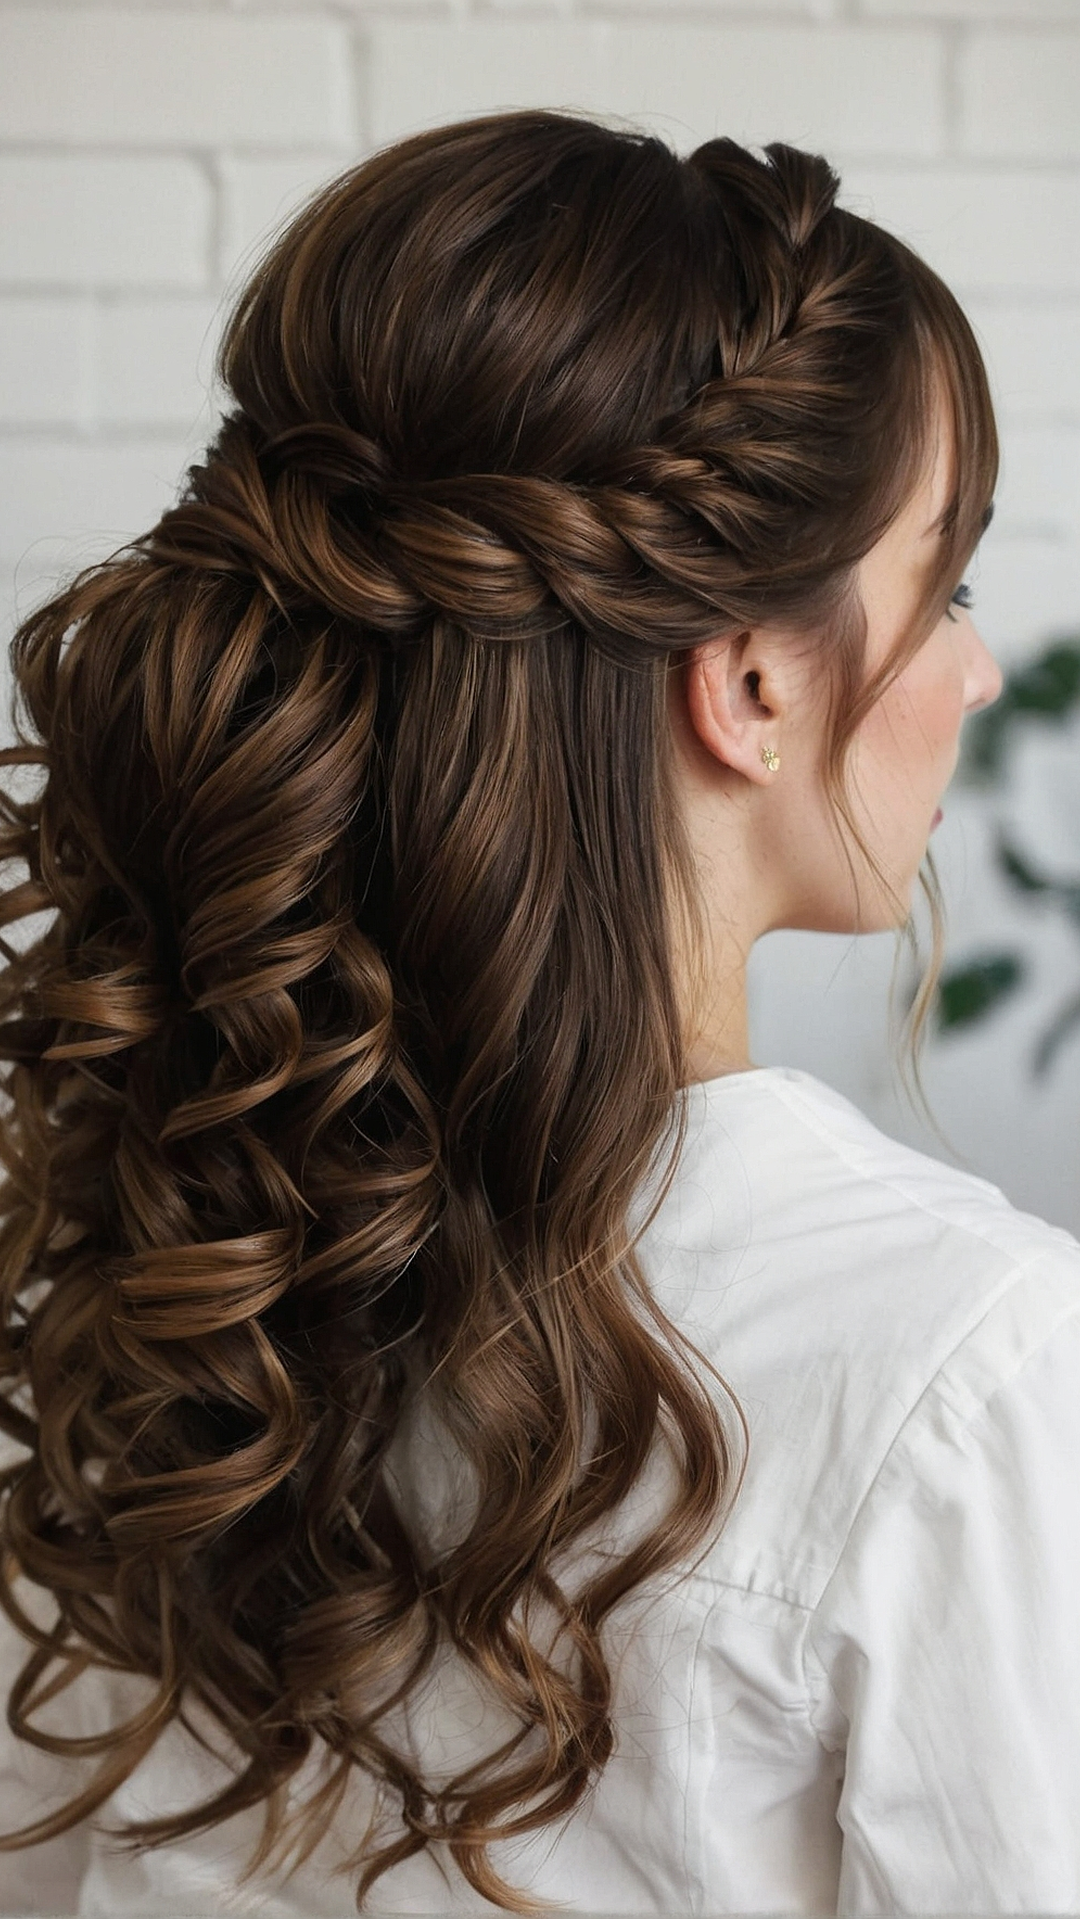 Sweetheart Styles: Heart-Shaped Braids for Prom